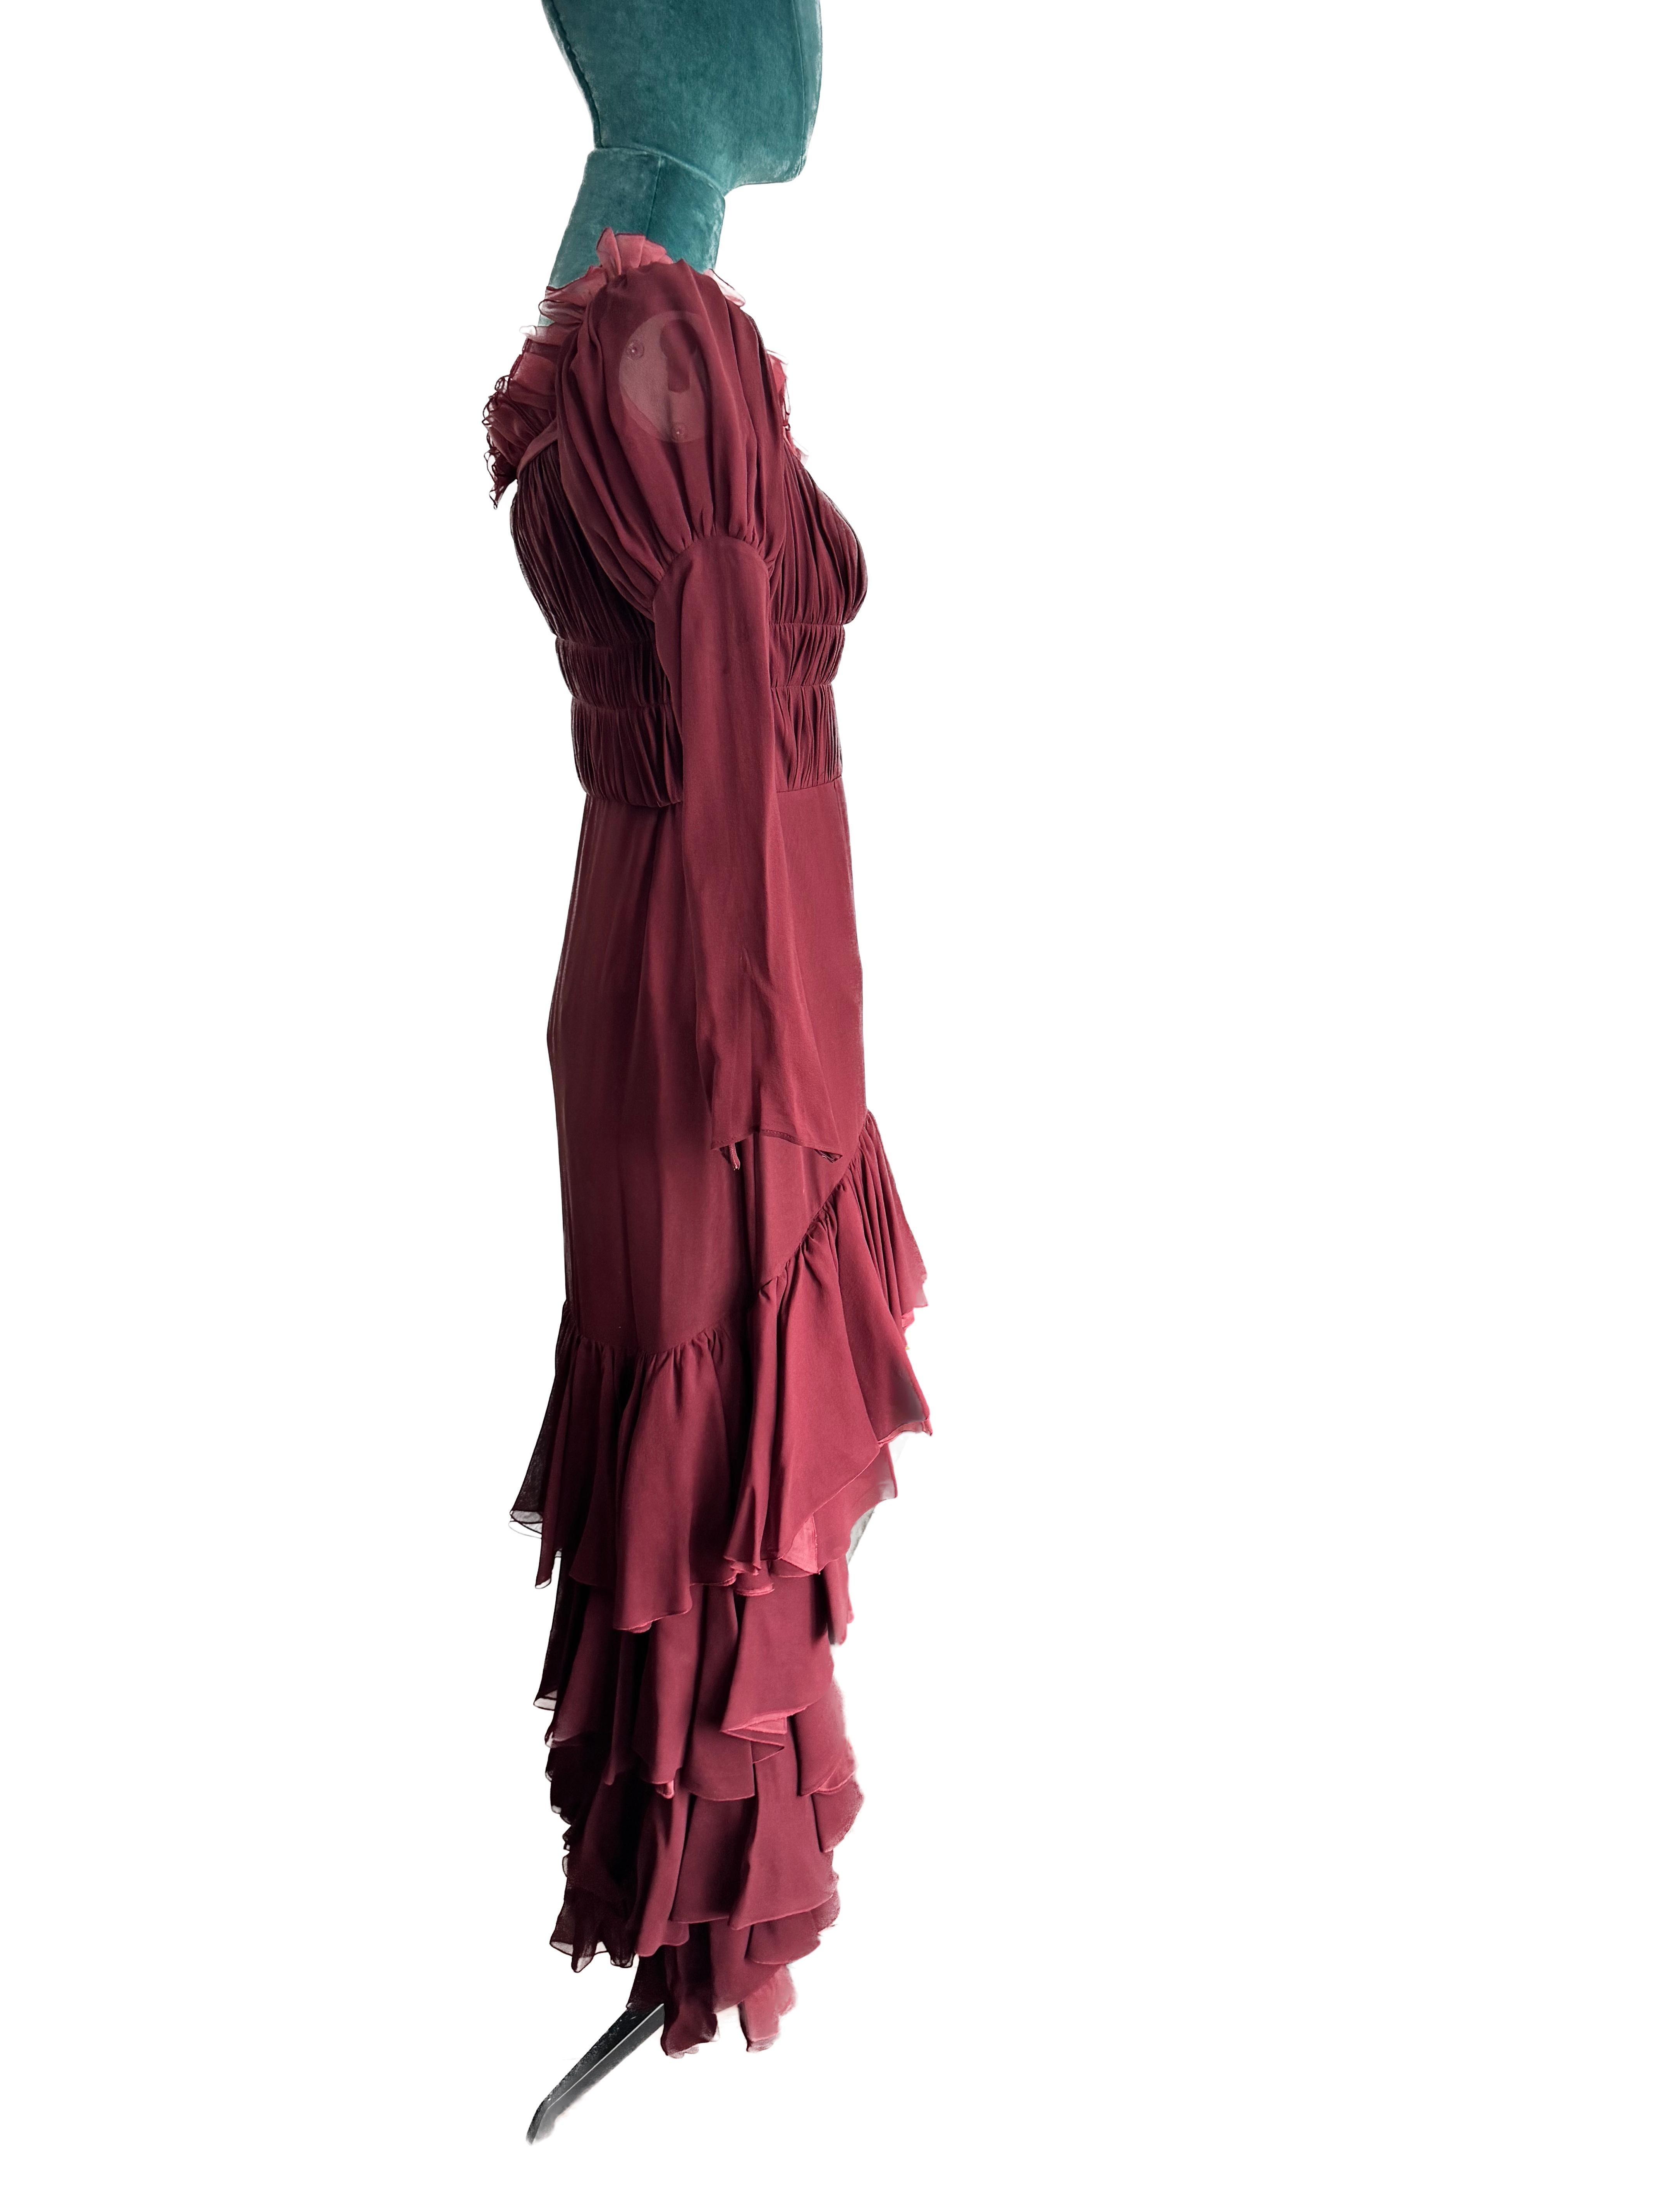 Giambattista Valli's 2018 runway burgundy chiffon ruffle dress was a breathtaking ensemble that epitomized elegance and romance. Crafted with meticulous attention to detail, this dress was a stunning manifestation of the designer's signature